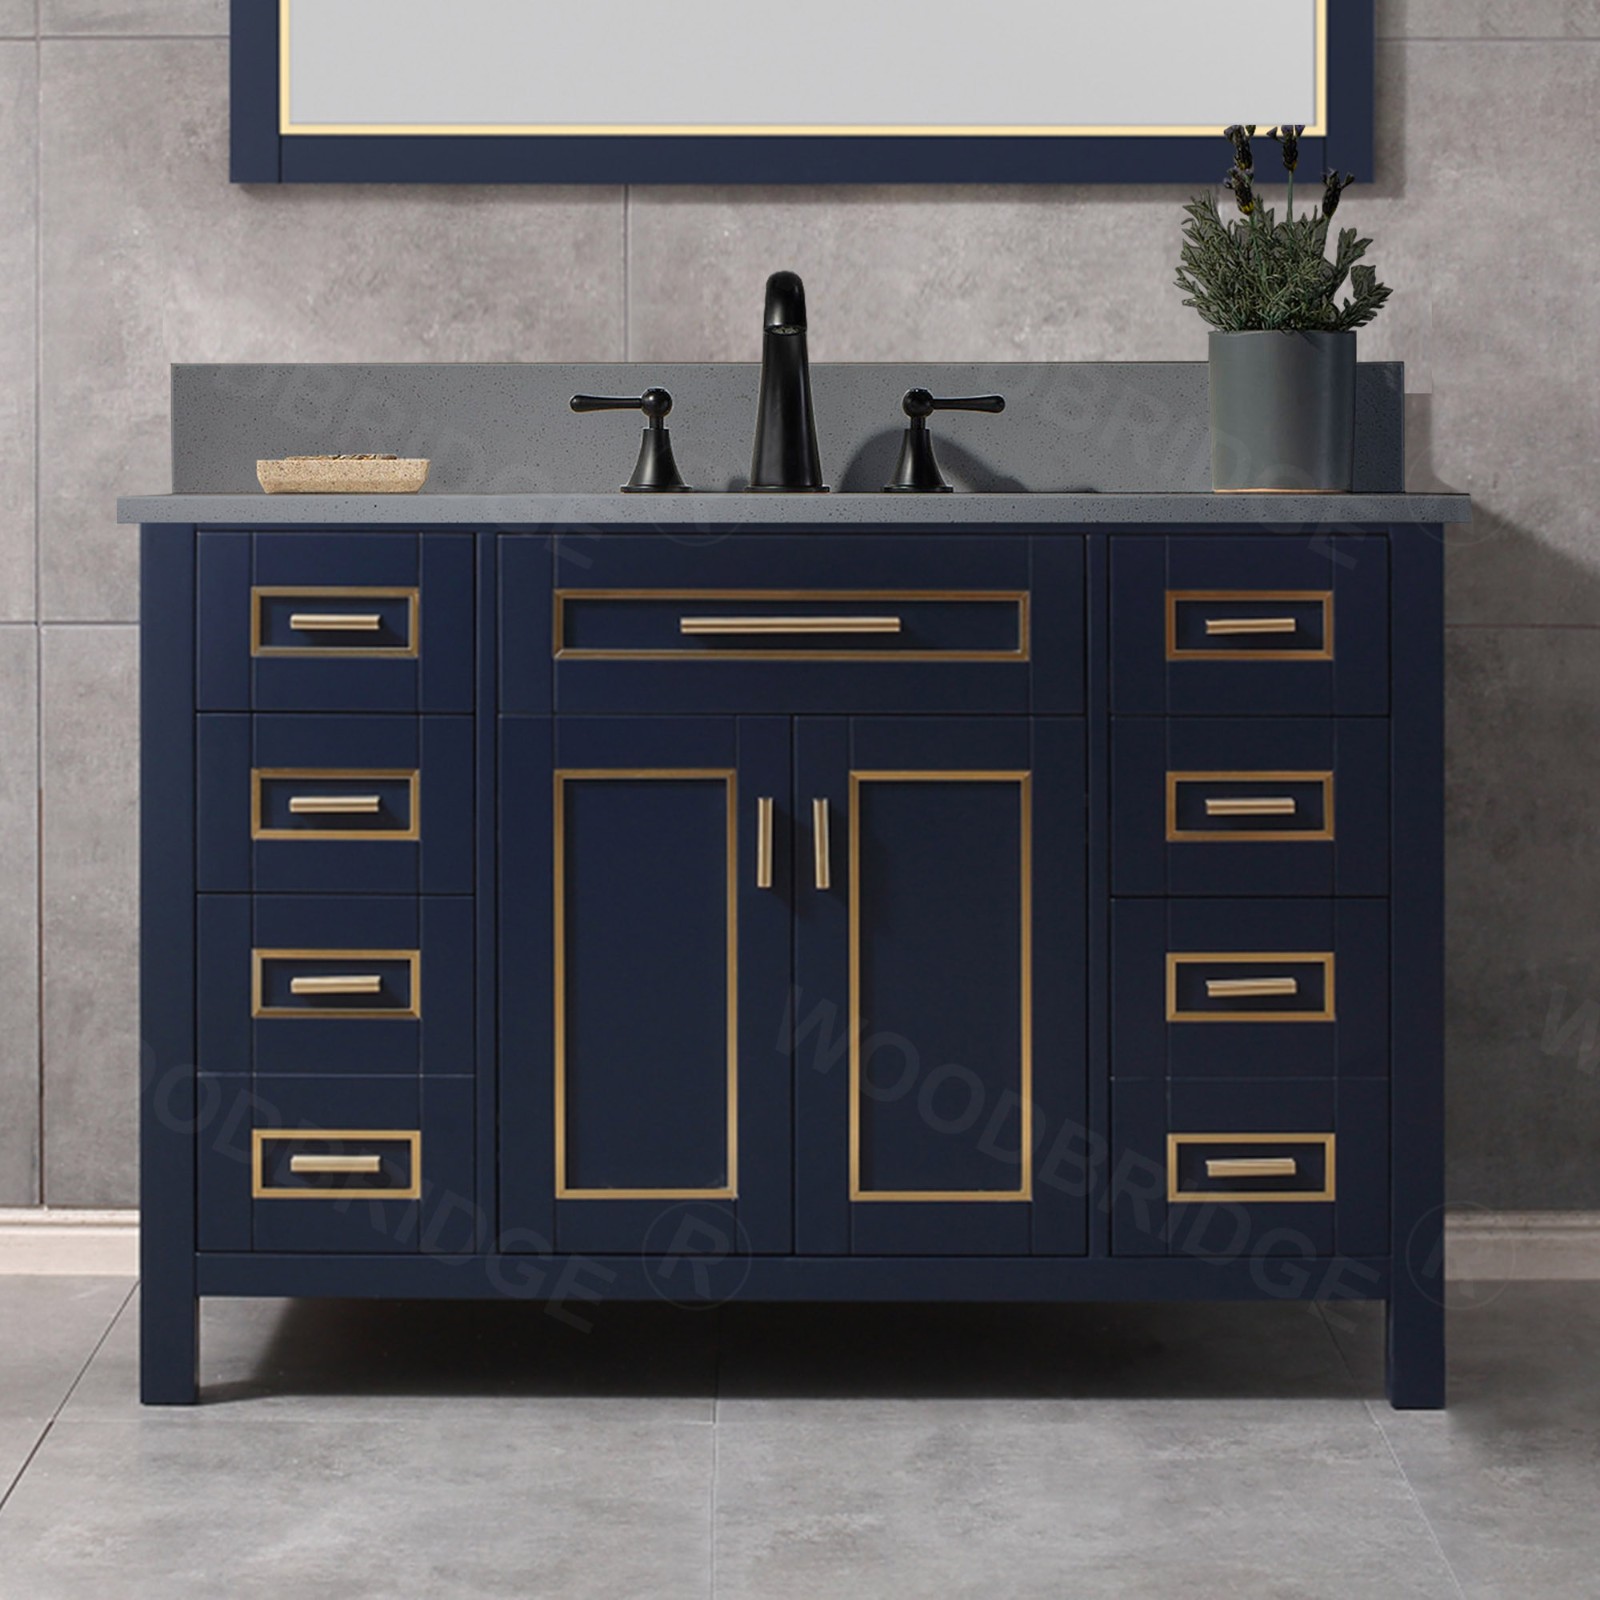  WOODBRIDGE Milan  49” Floor Mounted Single Basin Vanity Set with Solid Wood Cabinet in Navy Blue and Engineered stone composite Vanity Top in Dark Gray with Pre-installed Undermount Rectangle Bathroom Sink and Pre-Drilled 3-Hole for 4-inch Centerset Fauce_4727